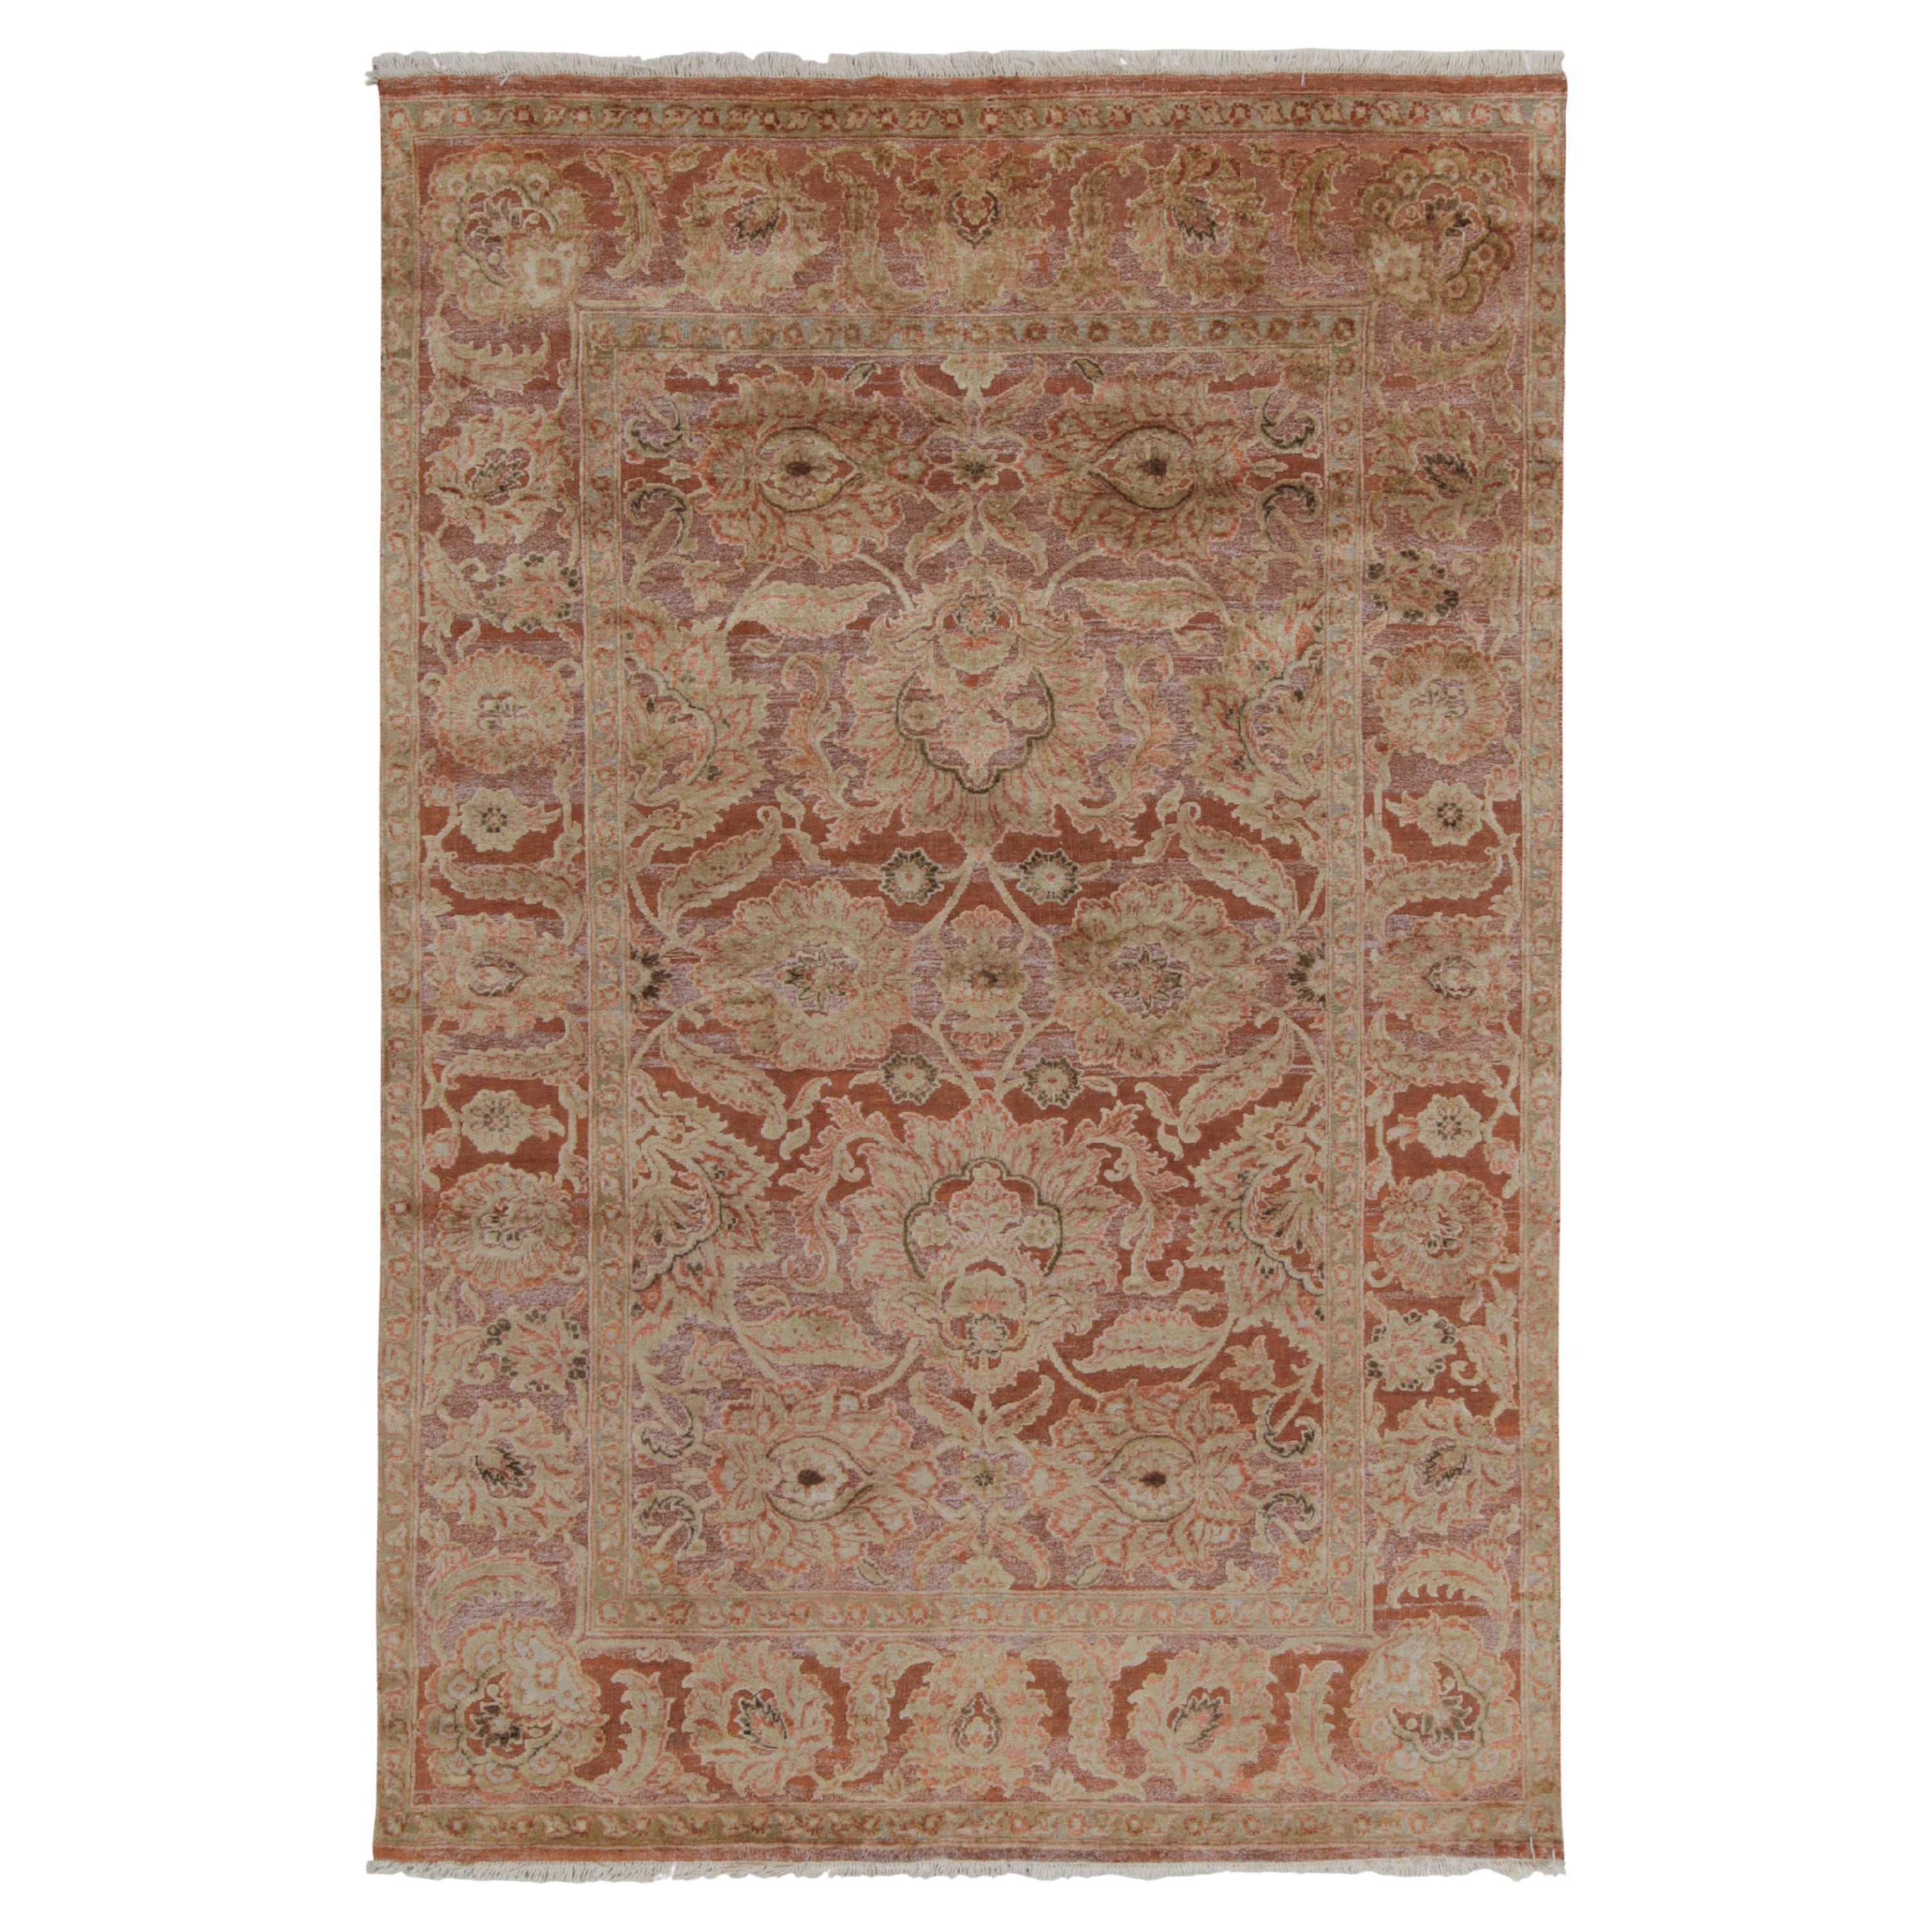 Rug & Kilim’s Tabriz Style Rug in Rust Red, Pink and Beige-Brown Floral Patterns For Sale